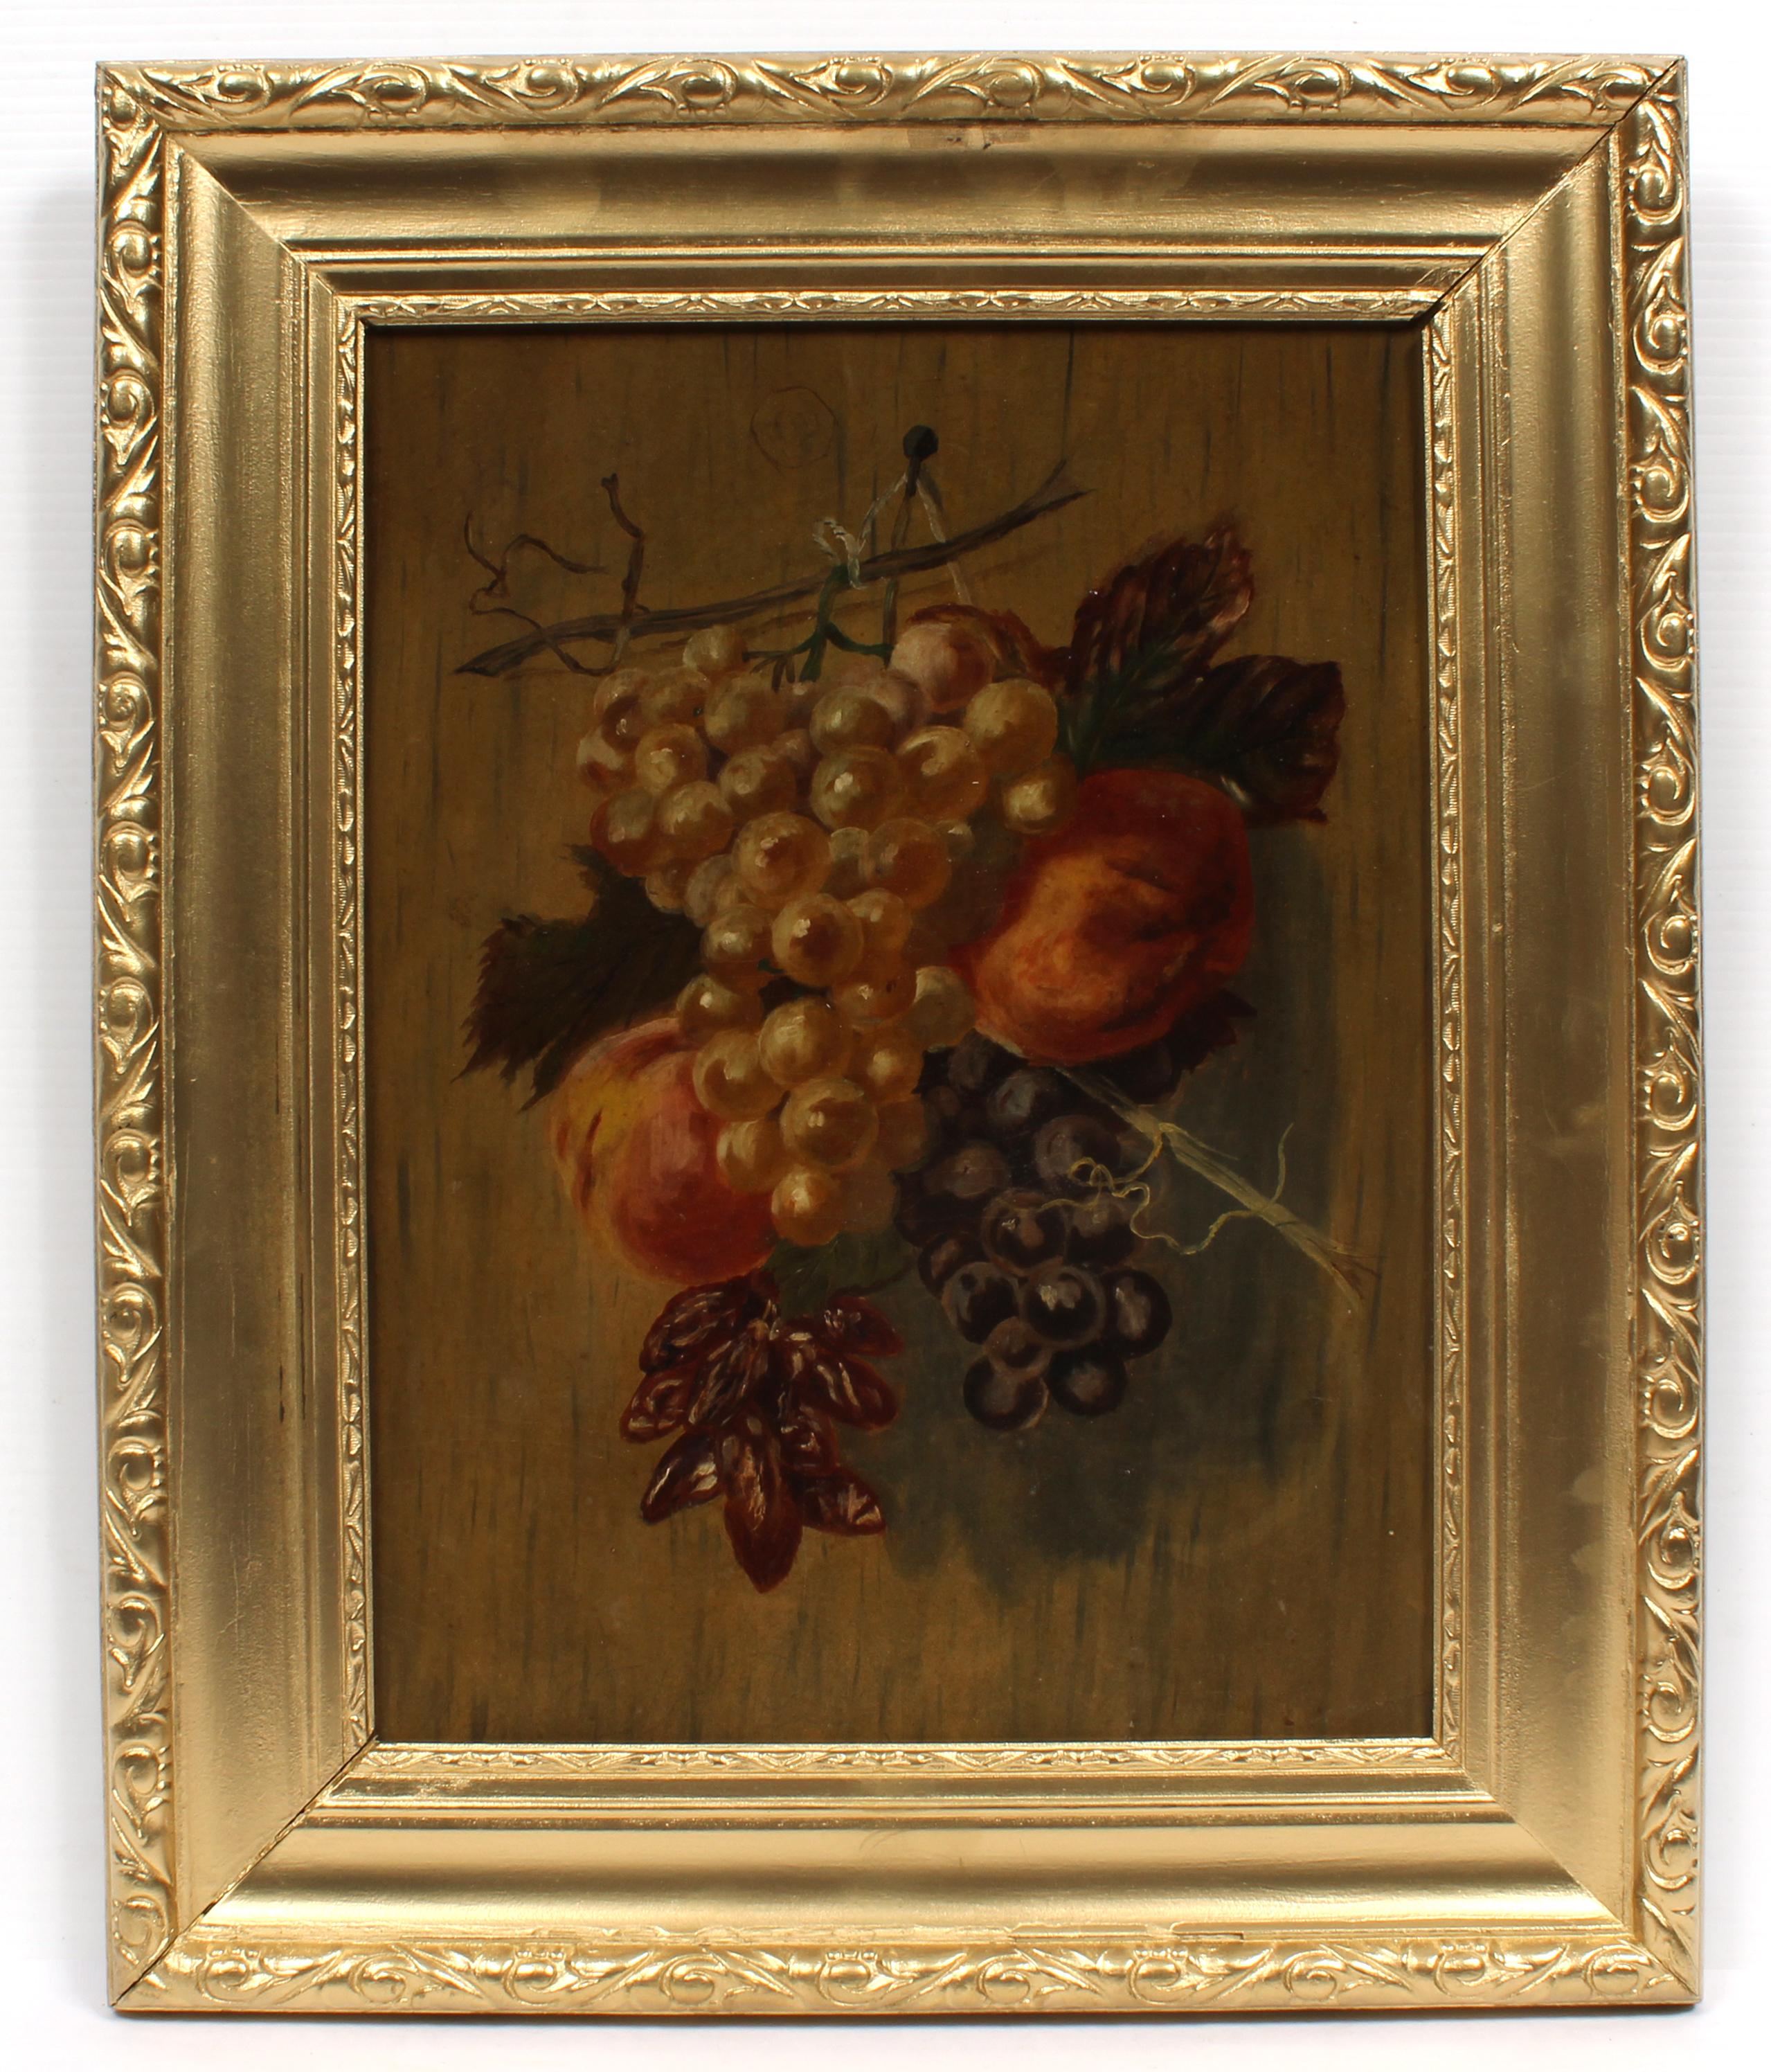 Unknown Still-Life Painting - Antique American Oil Painting Still Life of Hanging Fruit and Grapes